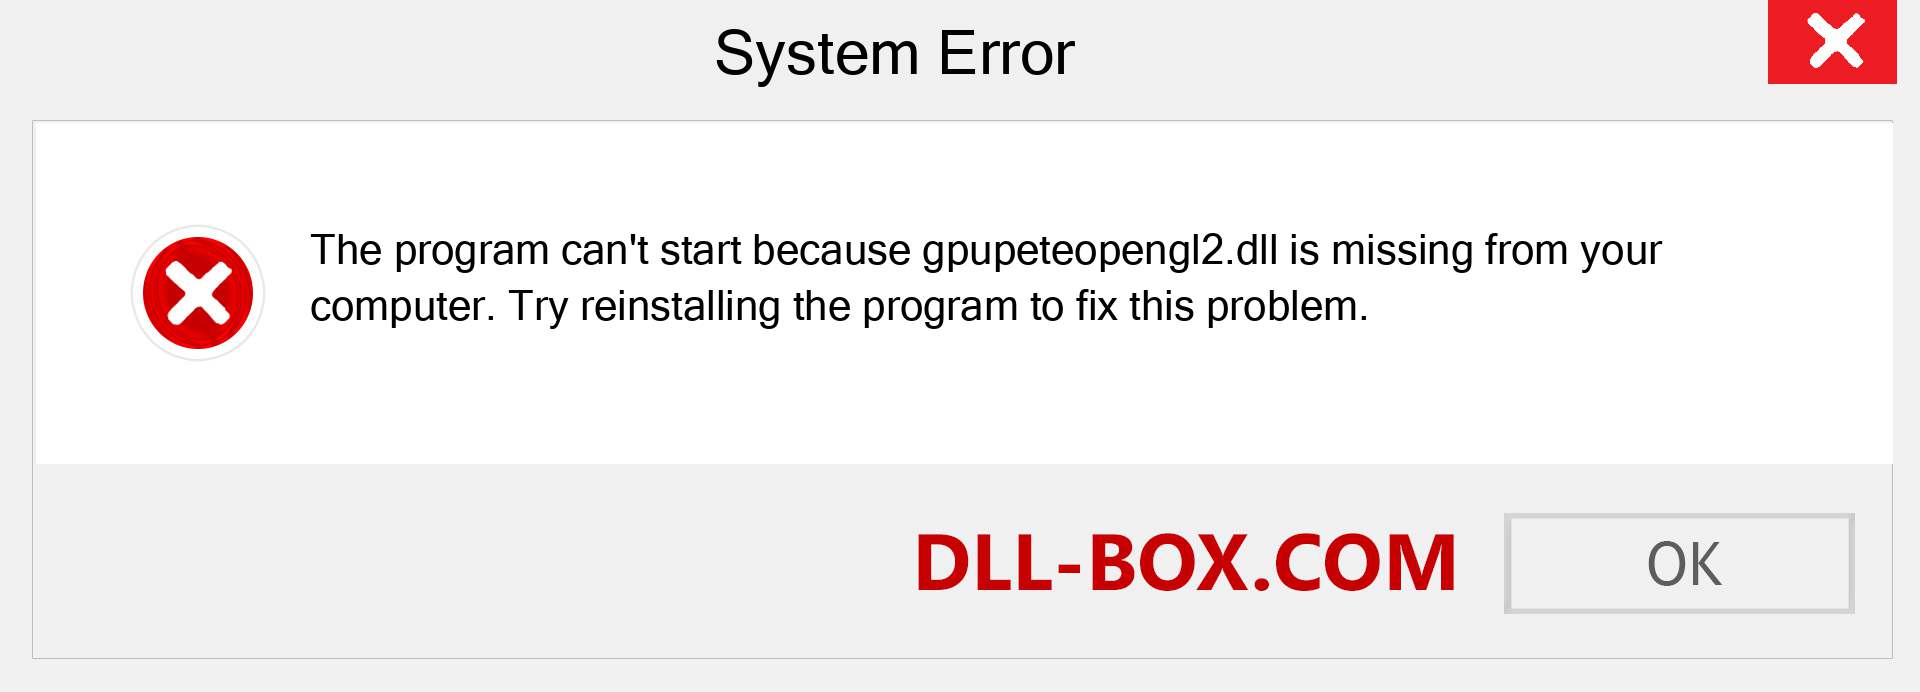  gpupeteopengl2.dll file is missing?. Download for Windows 7, 8, 10 - Fix  gpupeteopengl2 dll Missing Error on Windows, photos, images